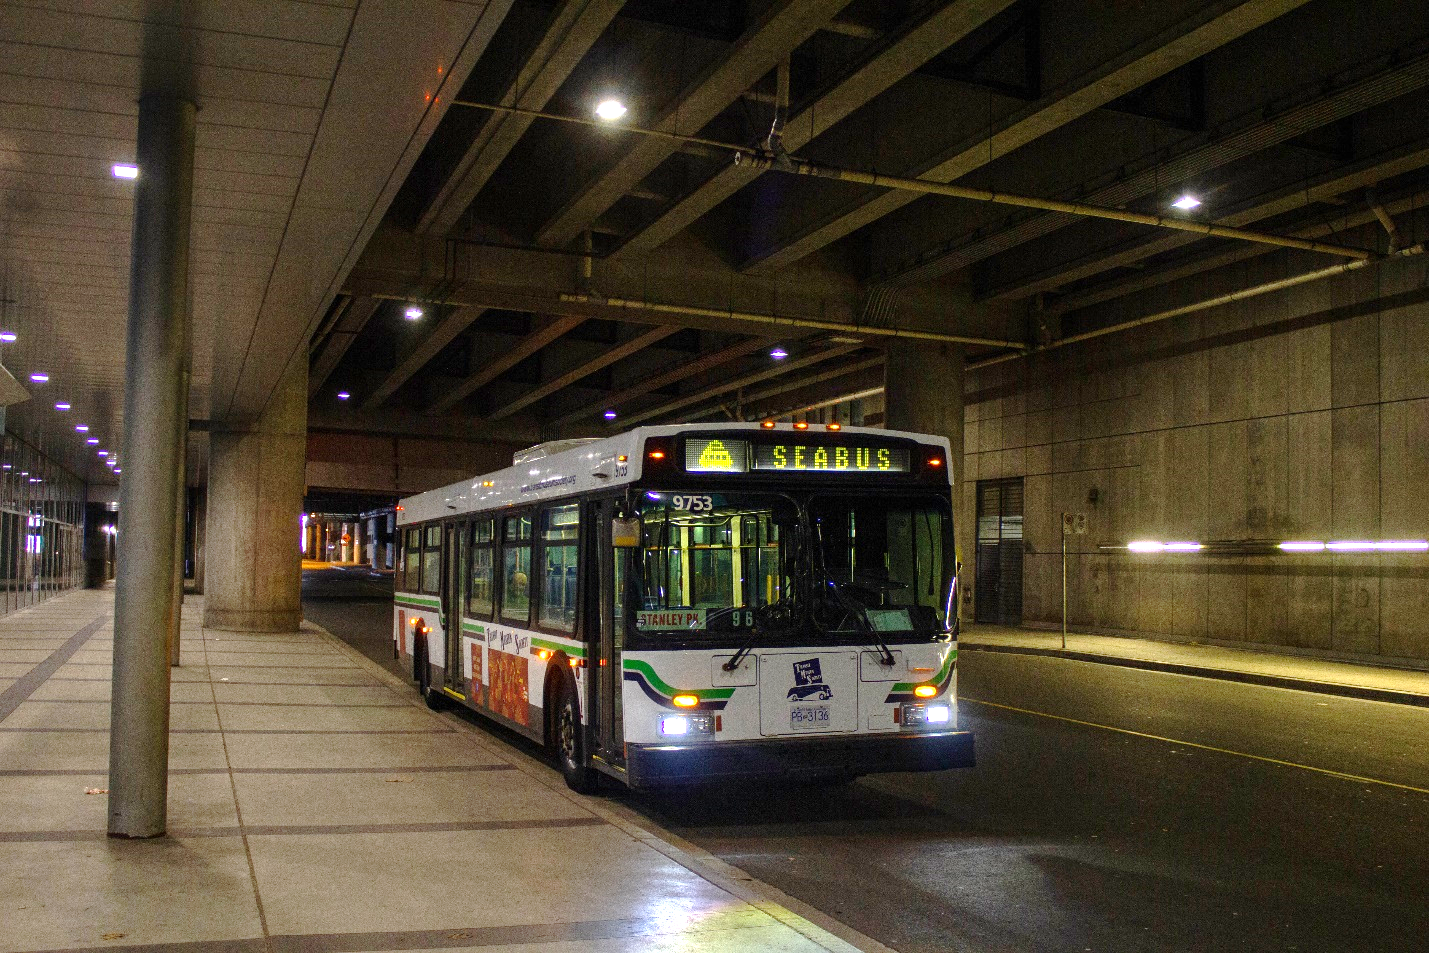 A bus in a tunnel

Description automatically generated